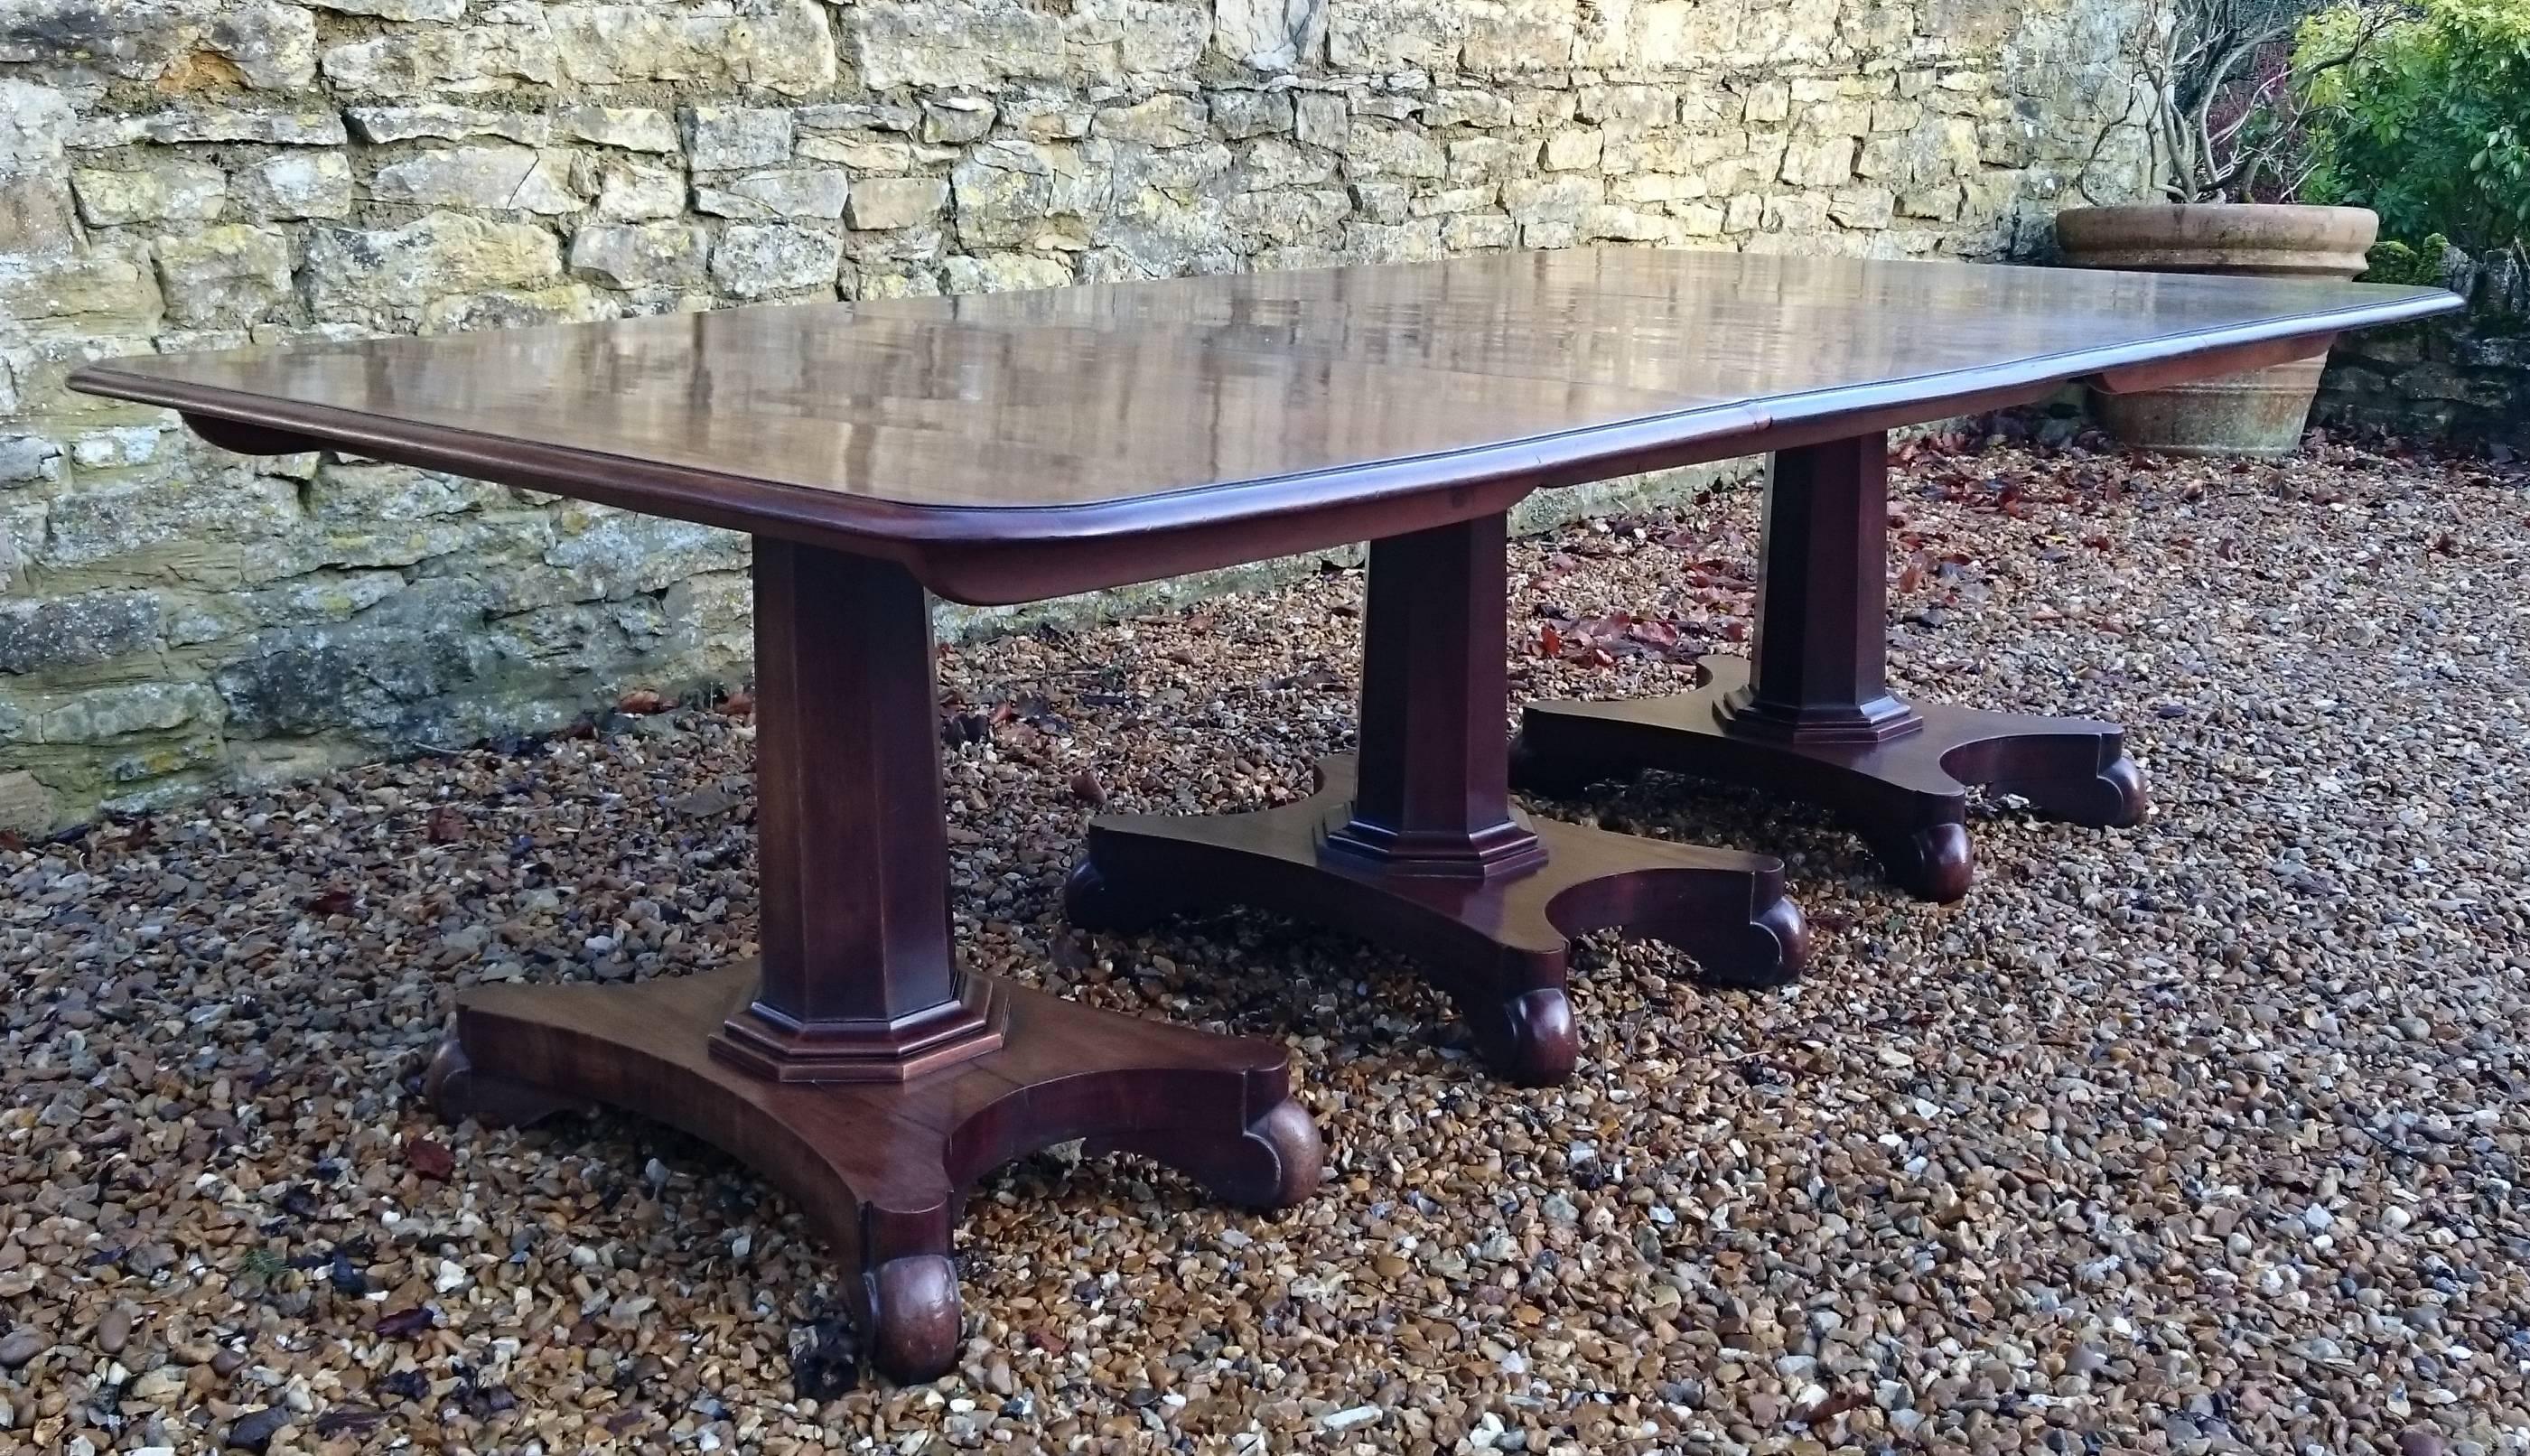 19th century William IV period mahogany antique three pedestal dining table. This dining table is made of large sheets of a very fine cut of dense grained mahogany. The grain pattern is very interesting and the whole table has attained a lovely